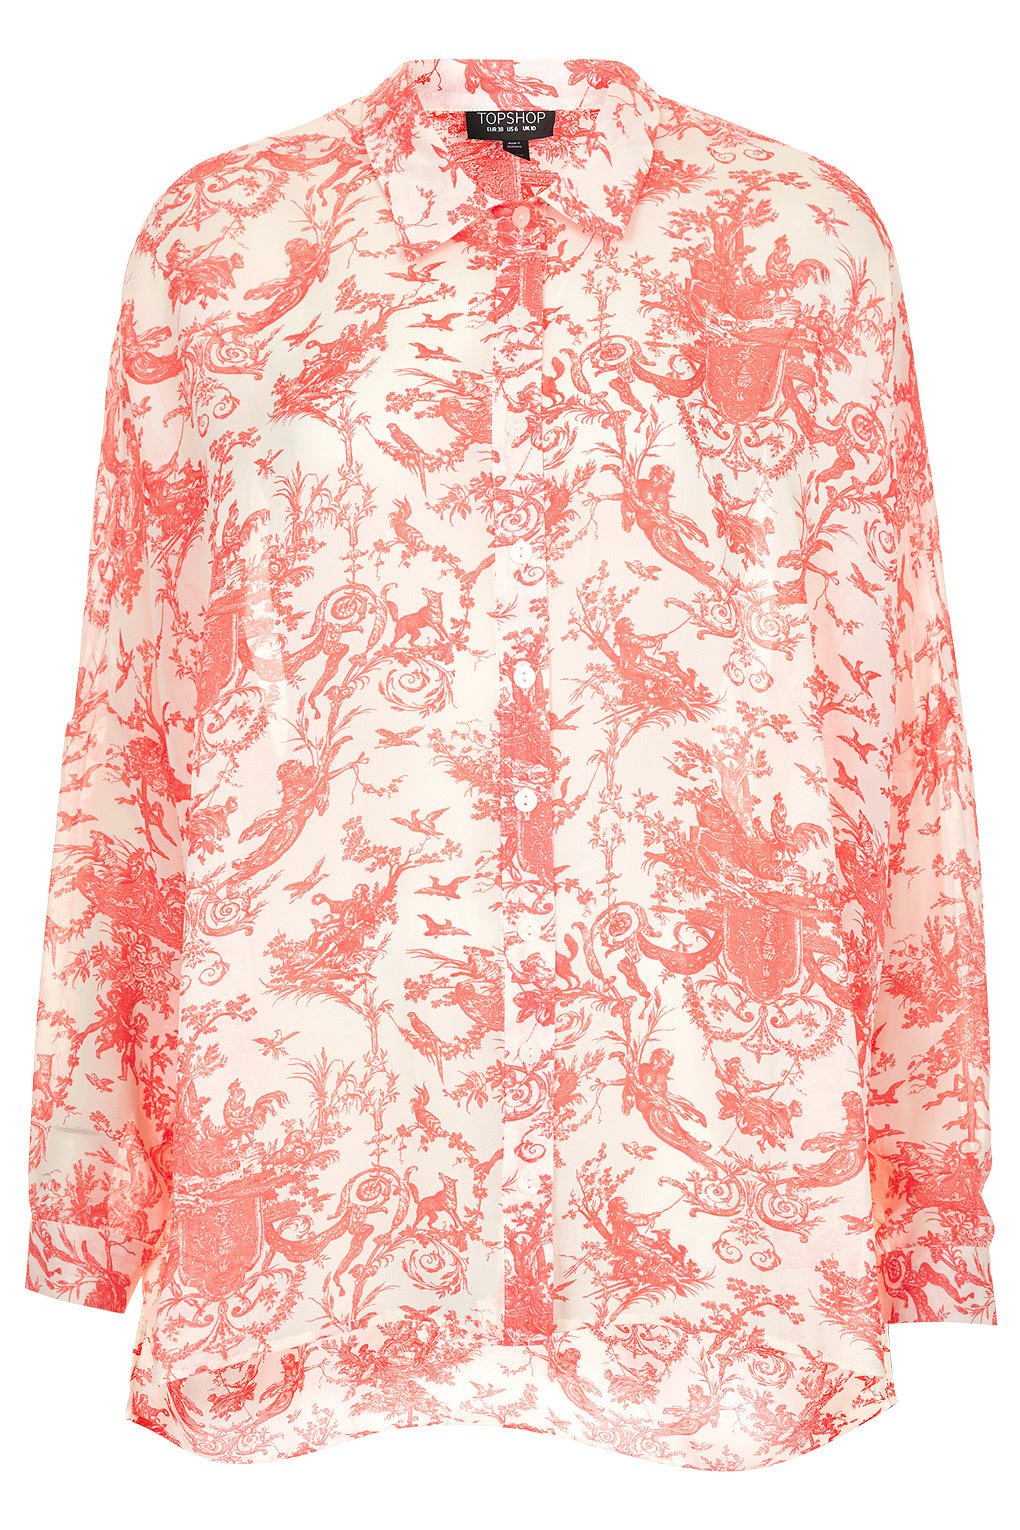 Topshop Oversize Toile Print Shirt in Pink | Lyst